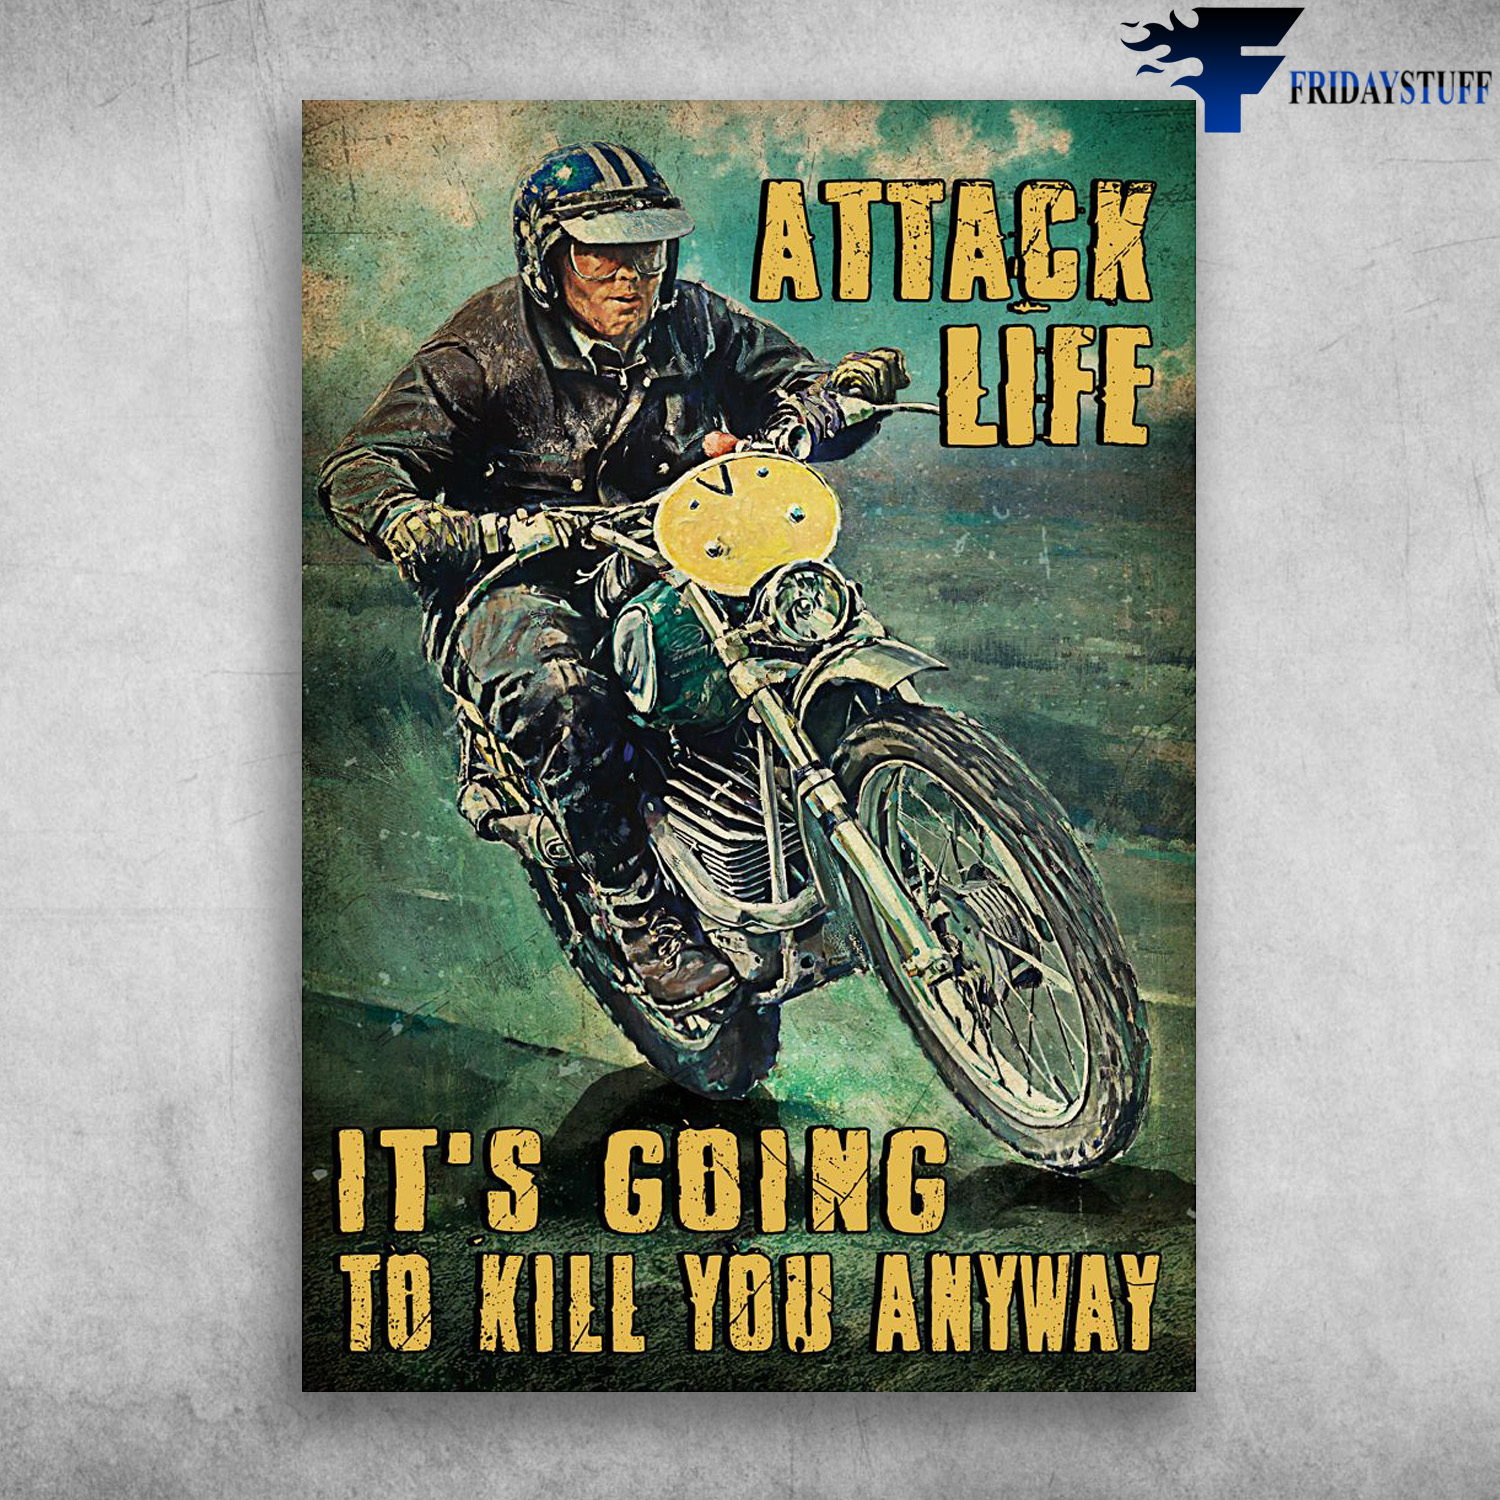 Old Man Riding, Old Biker, Biker Man - Attack Life, It's Going To Kill You Anyways